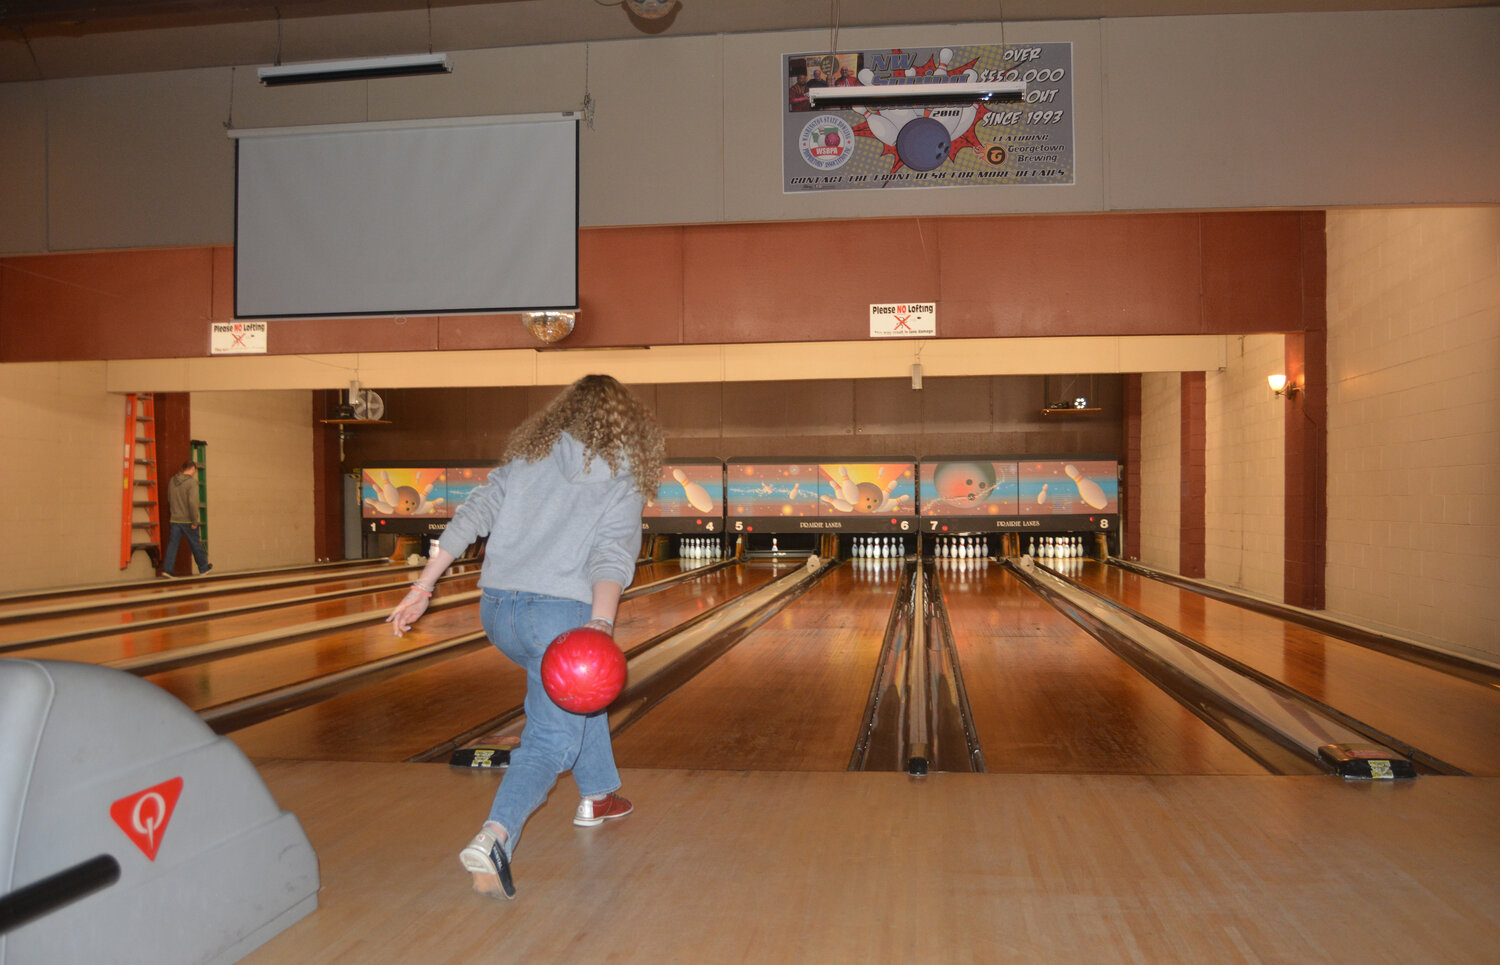 Learners Without Limits will hold its annual bowling fundraiser to benefit Yelm children and families on Nov. 16 at Prairie Lanes in Yelm.